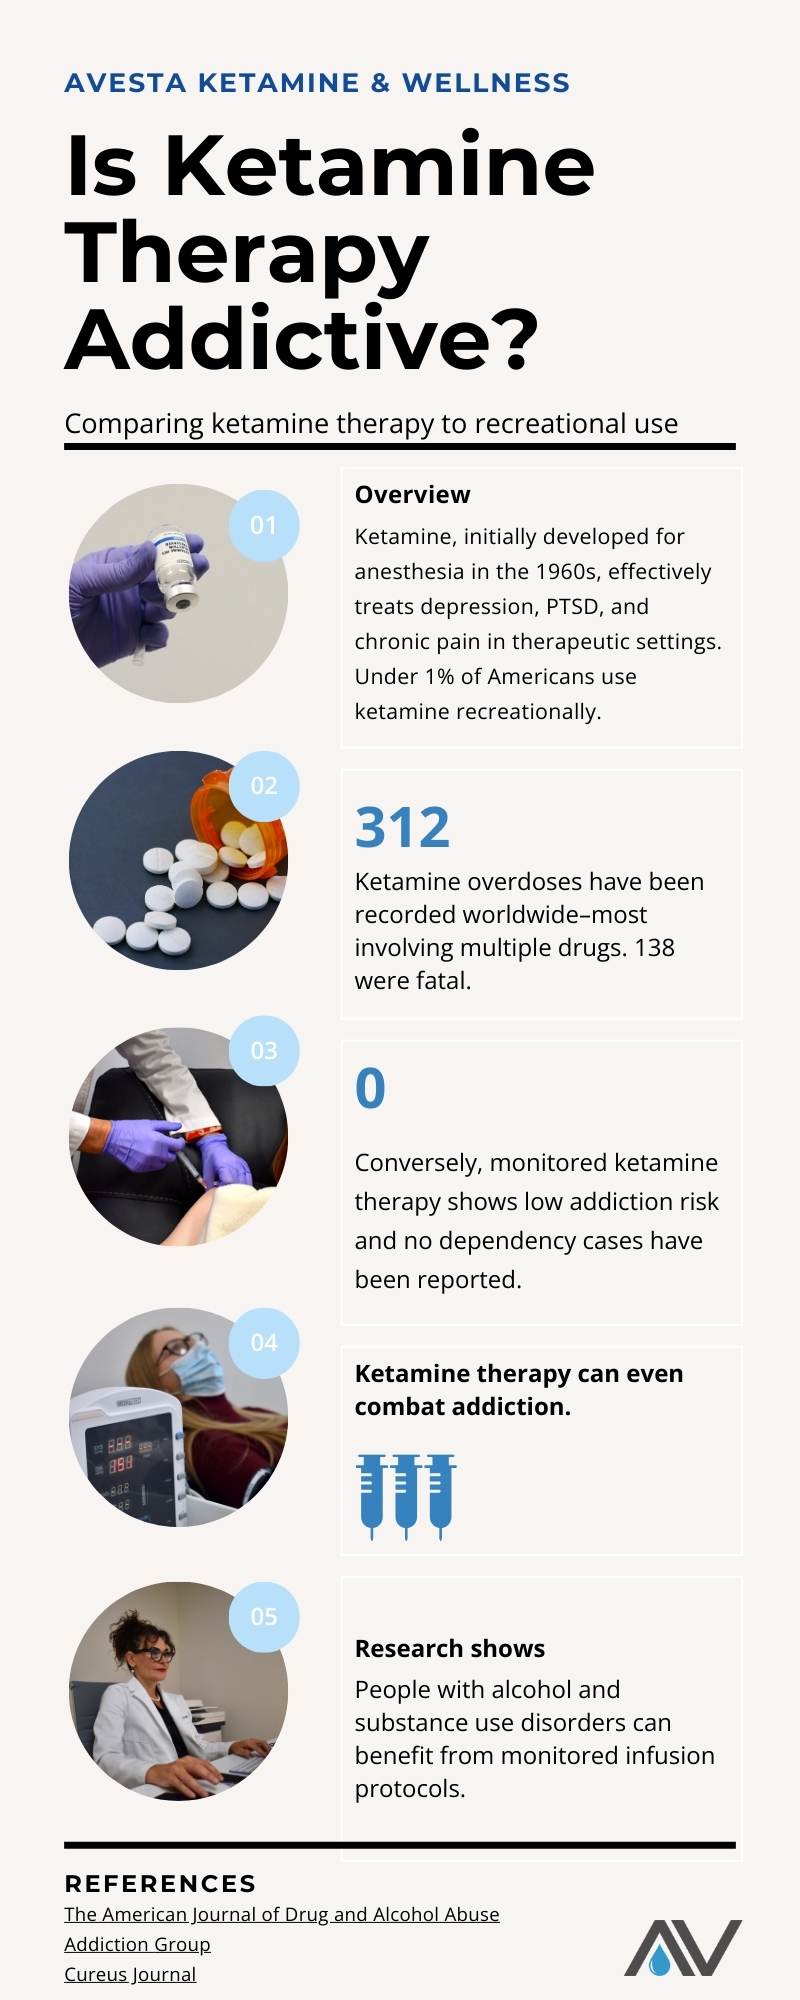 infographic answering the question, "is ketamine therapy addictive?"